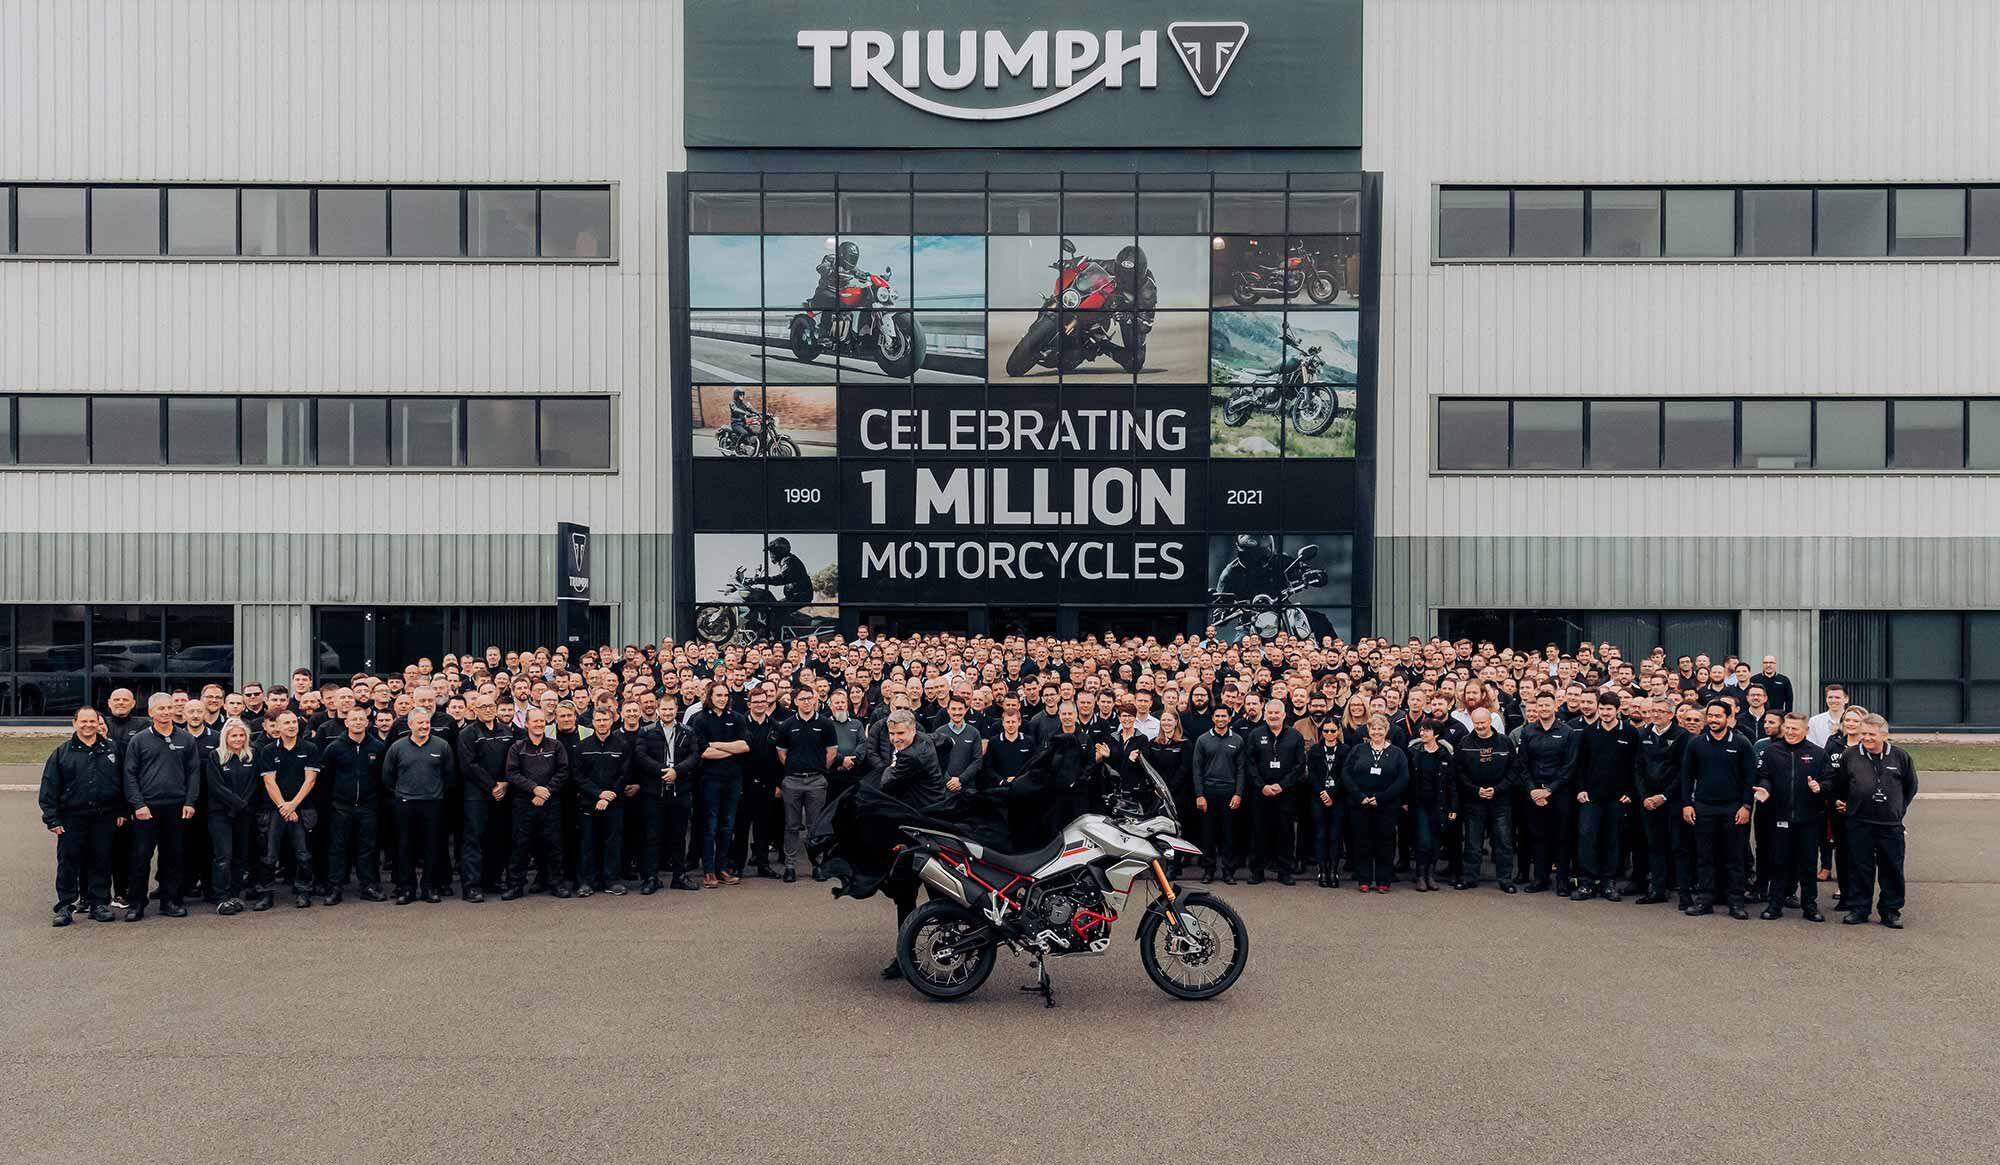 The entire UK team took part in the unveiling of the bike at Triumph’s Hinckley HQ.